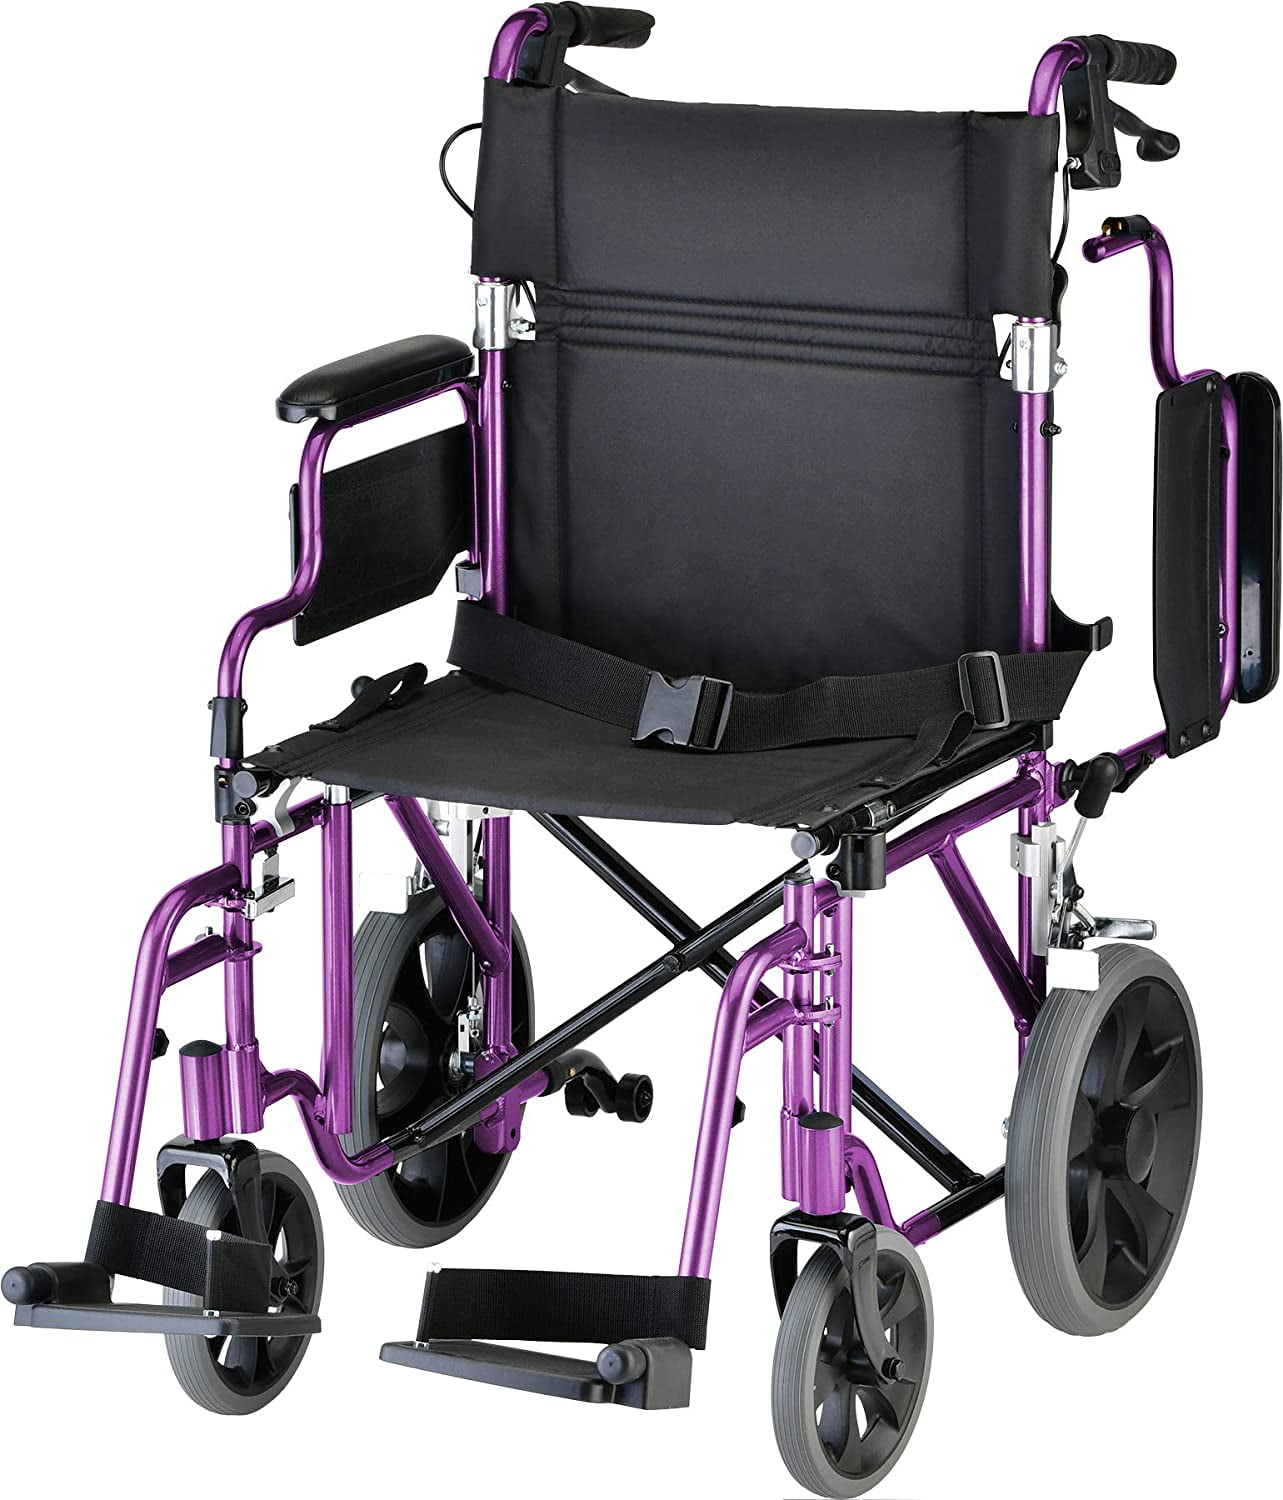 Nova Medical Lightweight Transport Chair With Locking Hand Brakes 12 Rear Wheels Removable Flip Up Arms For Easy Transfer Anti Tippers Included Purple Walmart Com Walmart Com